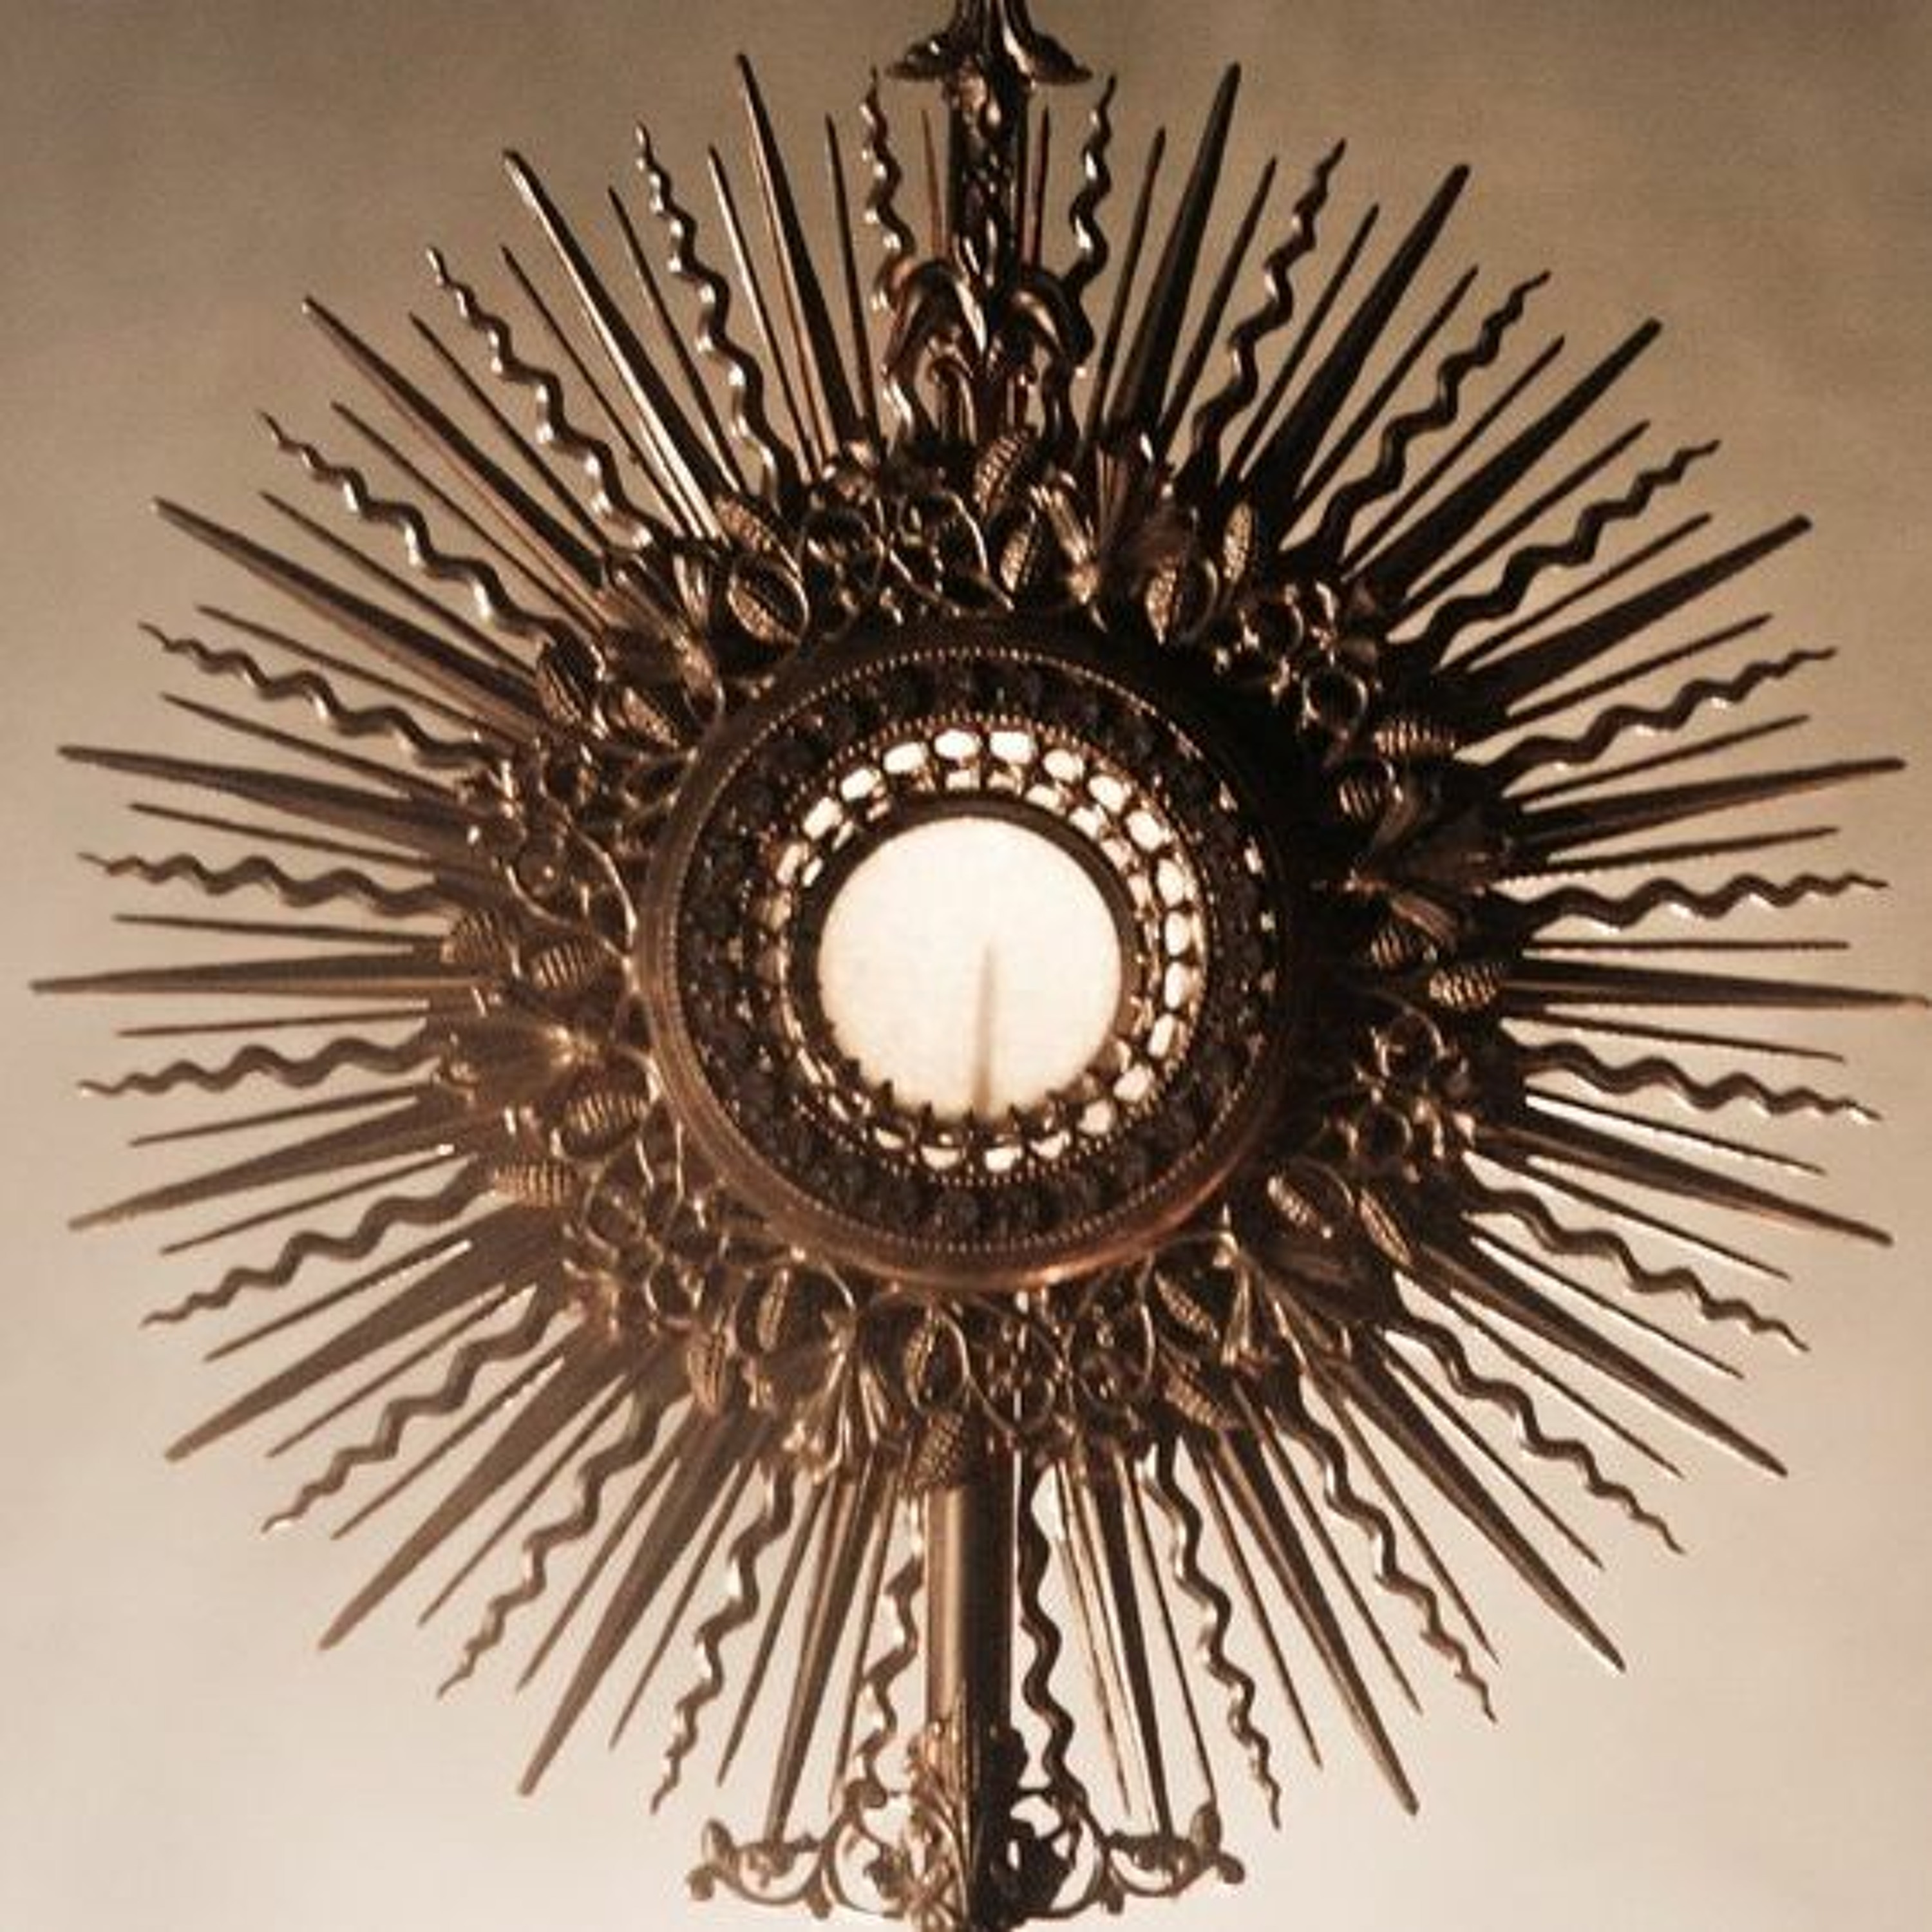 Eucharistic Miracles | Fr. Dominic Langevin, O.P.